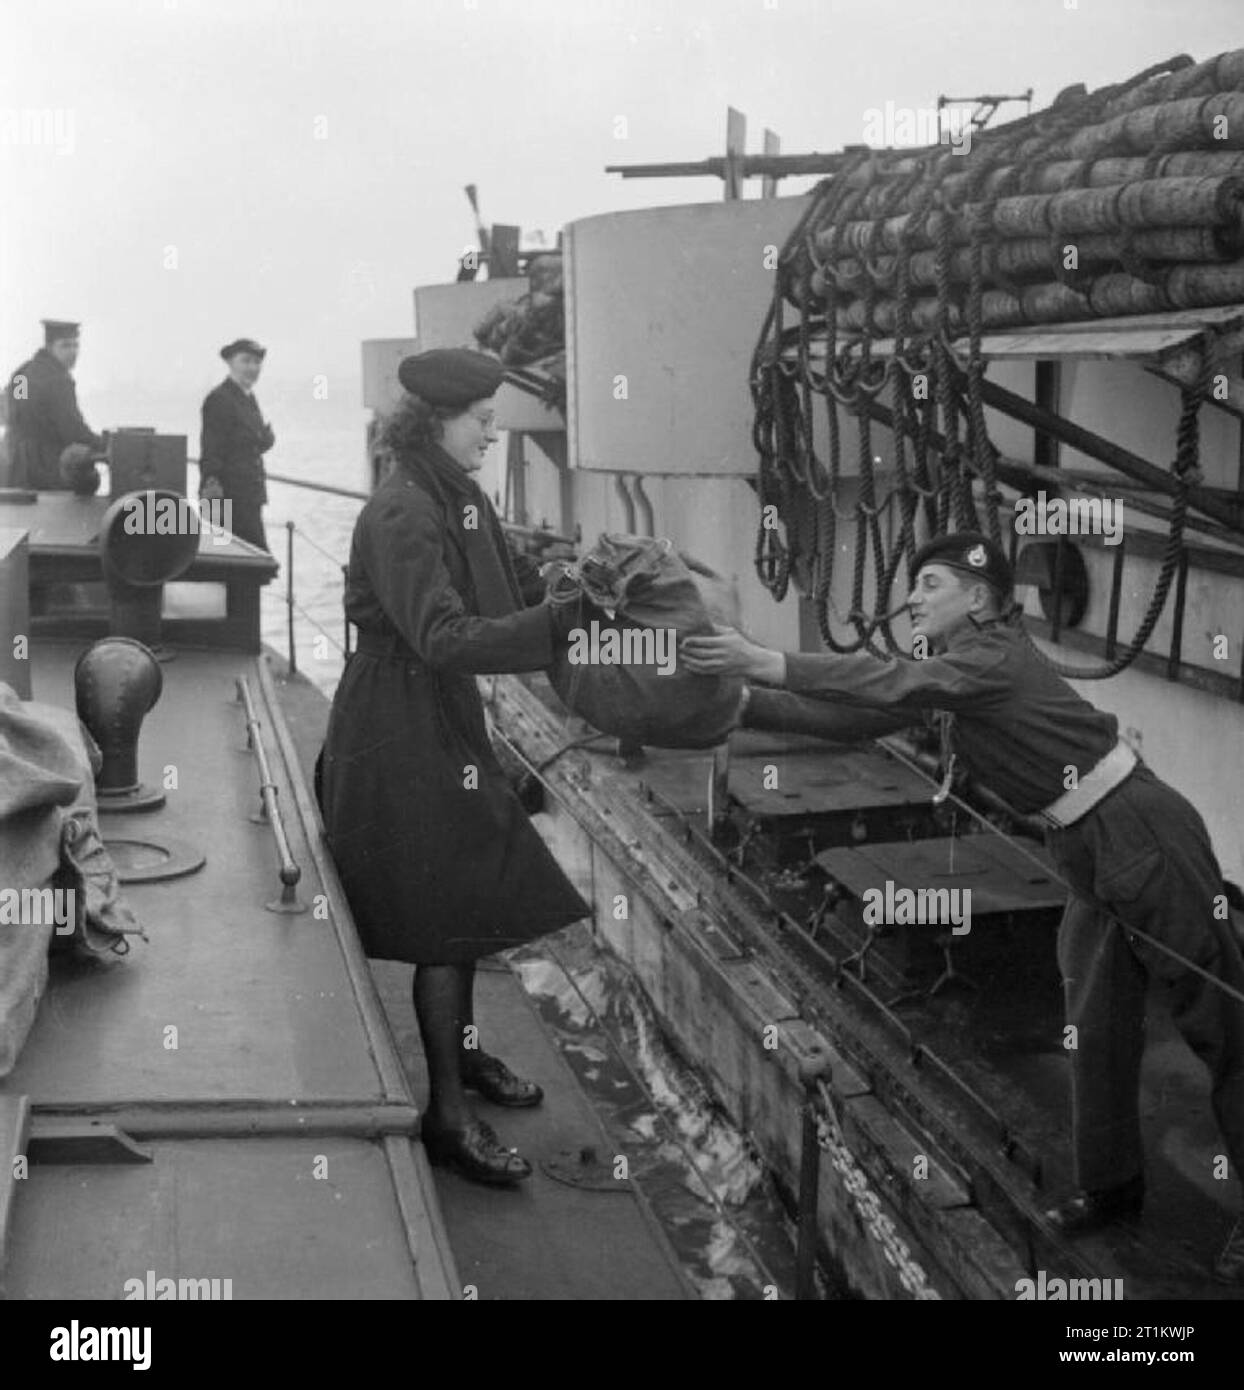 Women's Royal Naval Service- Wrens With the Fleet Mail, England, UK, November 1944 A Royal Marine stretches across from his landing craft to collect a sack of letters from a Wren of the Fleet Mail. The Wren is standing on the Mail Boat, which has come alongside the landing craft. Stock Photo